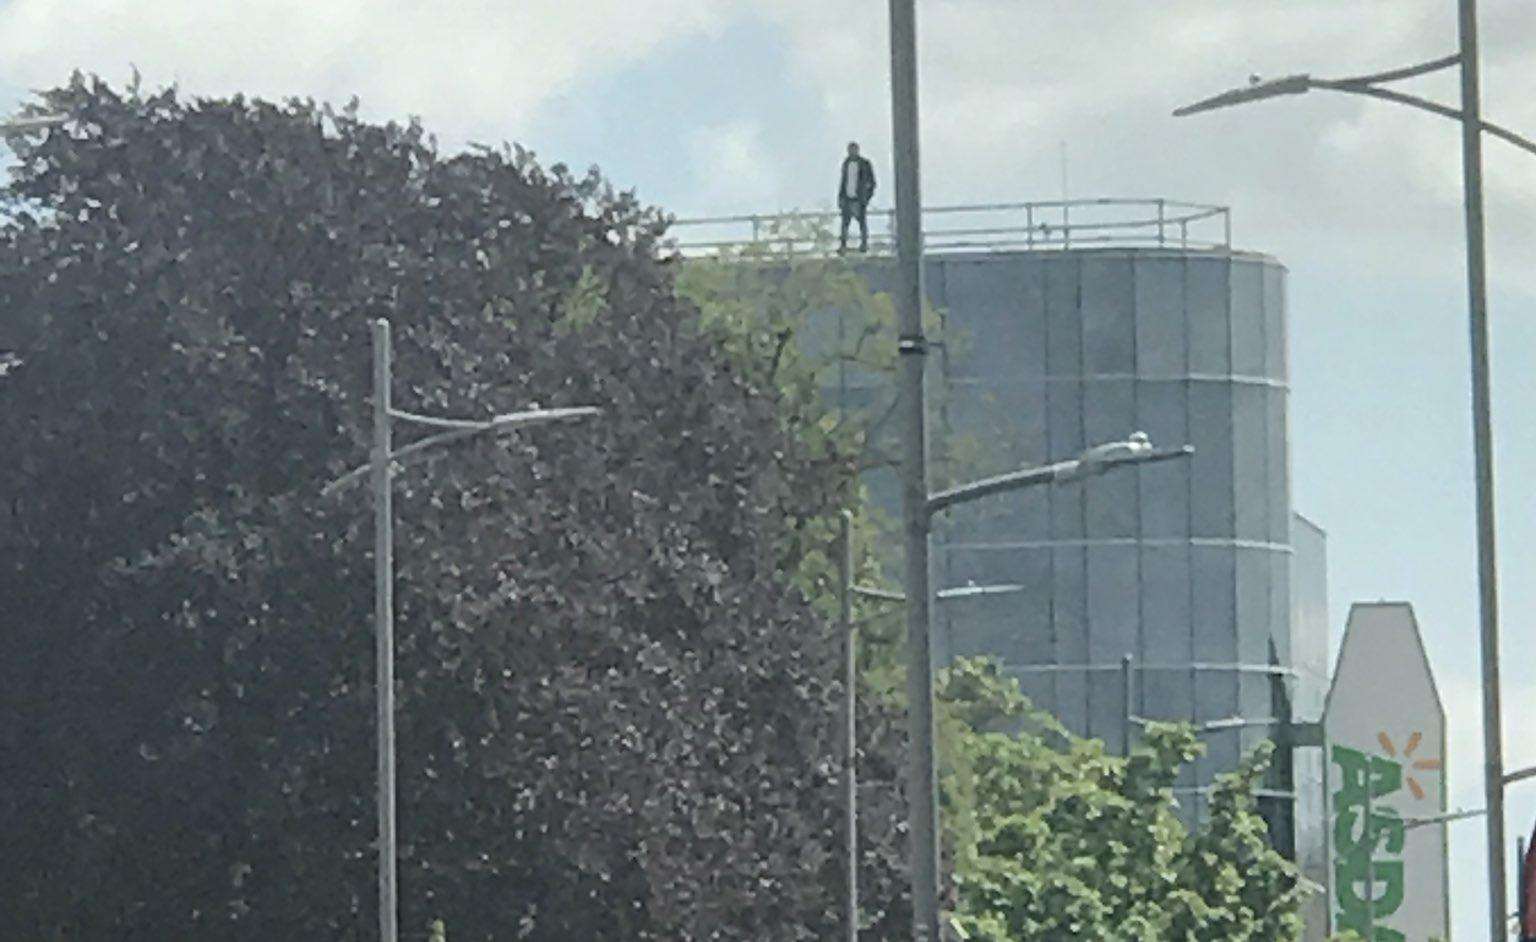 Man 'armed with a knife' on roof of Asda in Bexleyheath. Picture: @scarlettbrown89